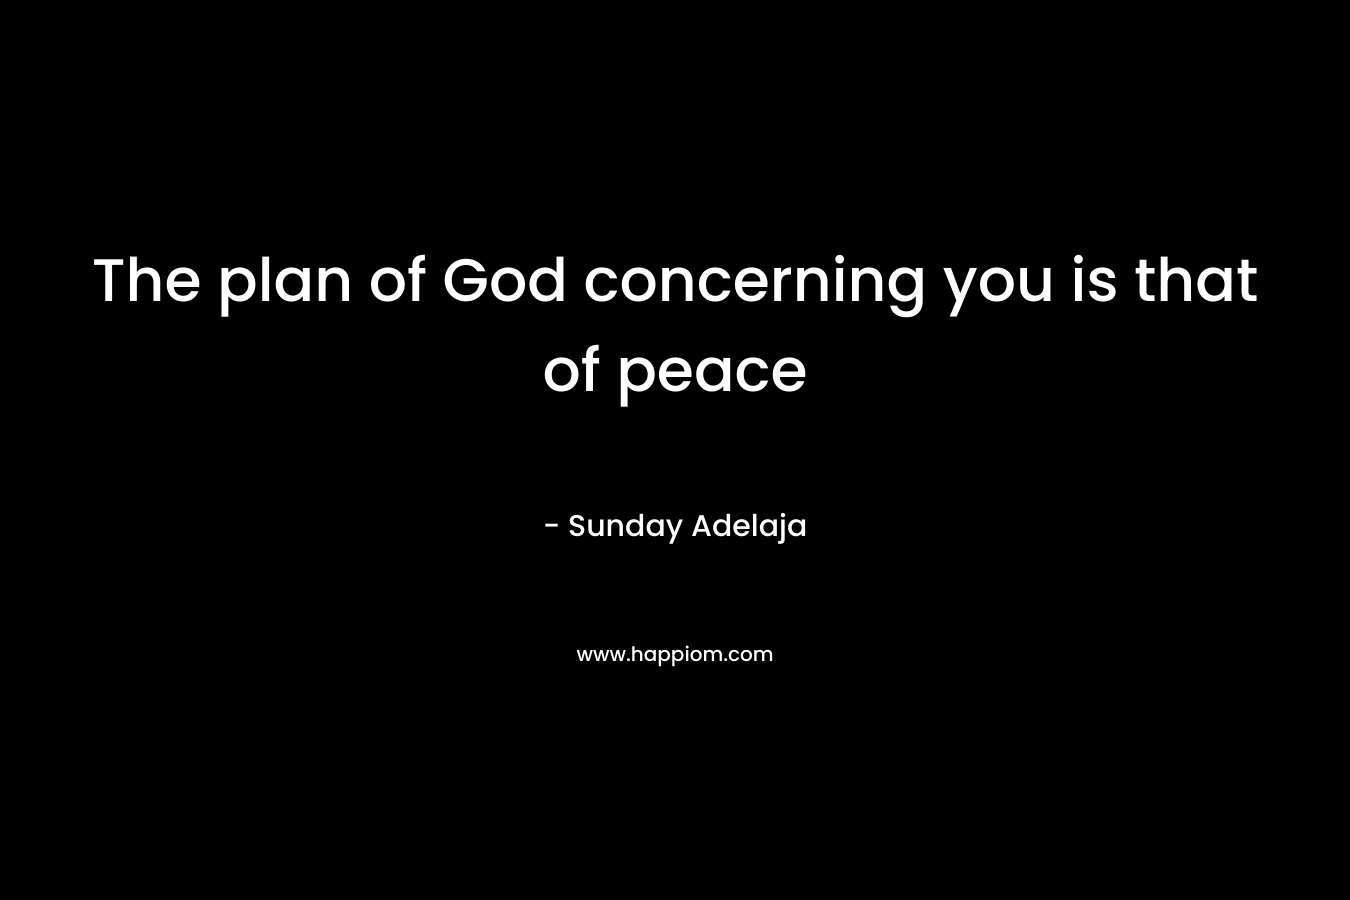 The plan of God concerning you is that of peace